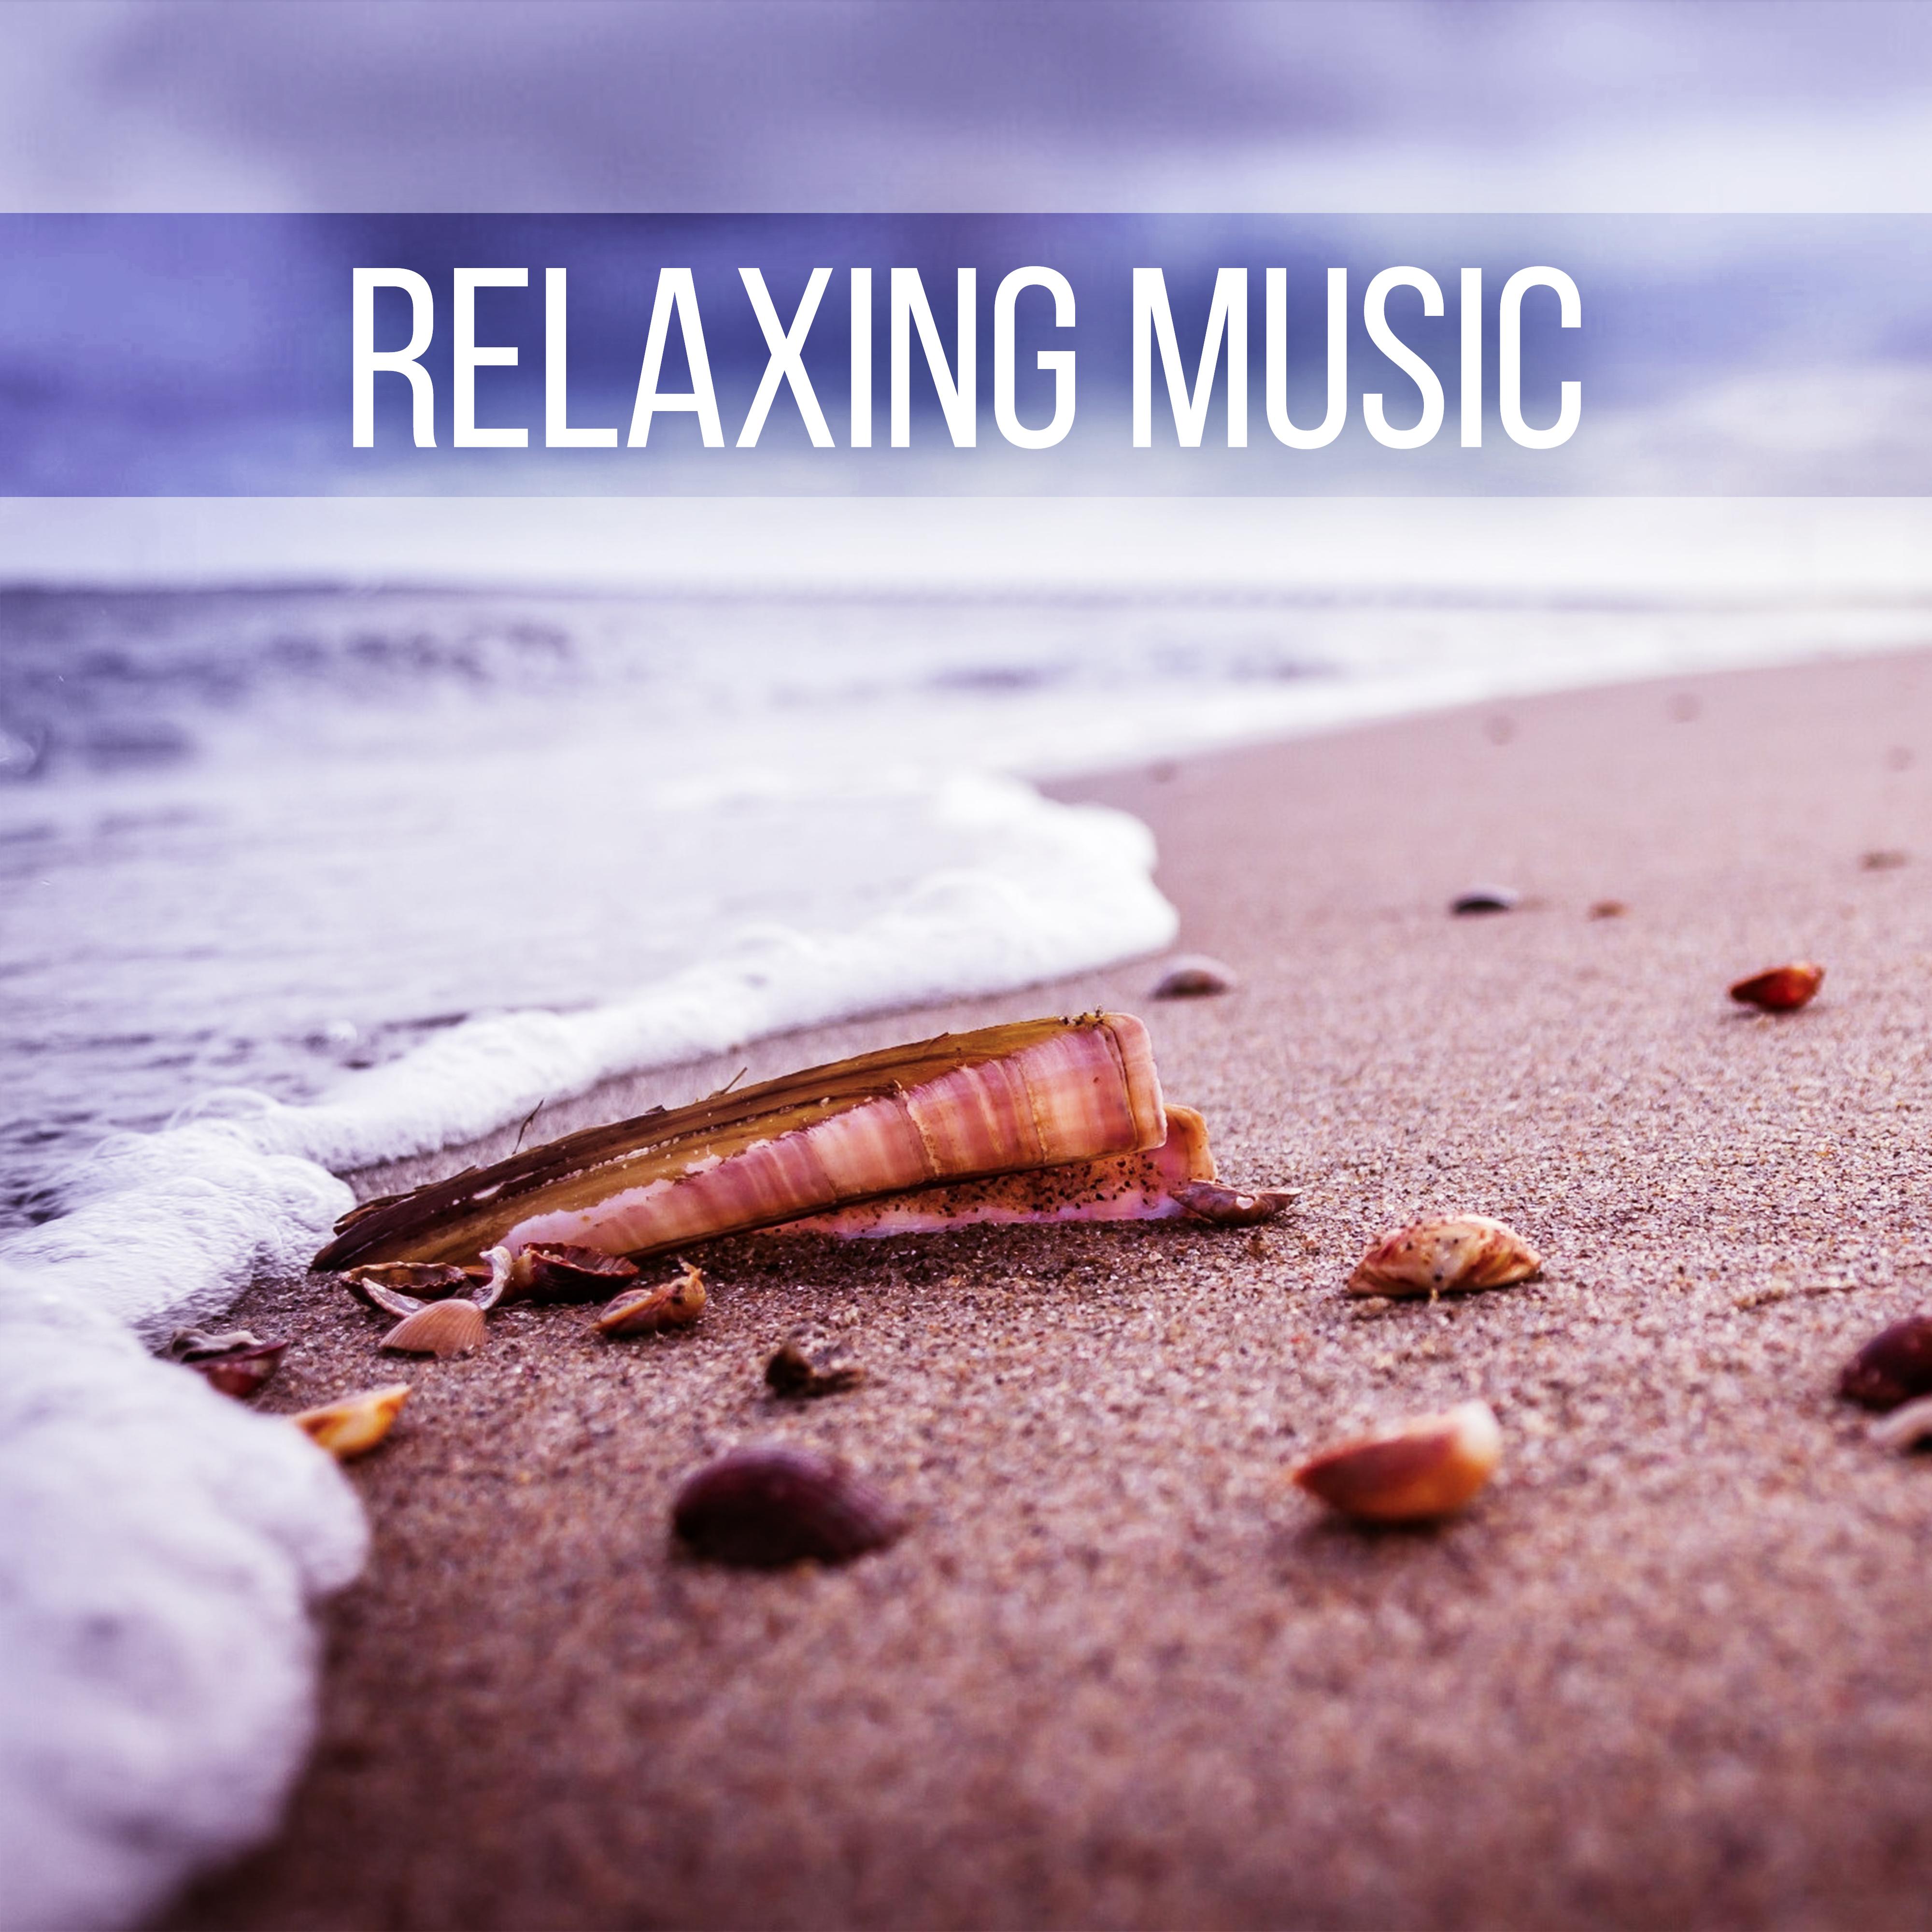 Relaxing Music - Sea Sounds, Music for Peace & Tranquility Massage, Night Sounds and Piano for Reiki Healing, Ocean Waves and Pan Flute, Erotic Massage Music